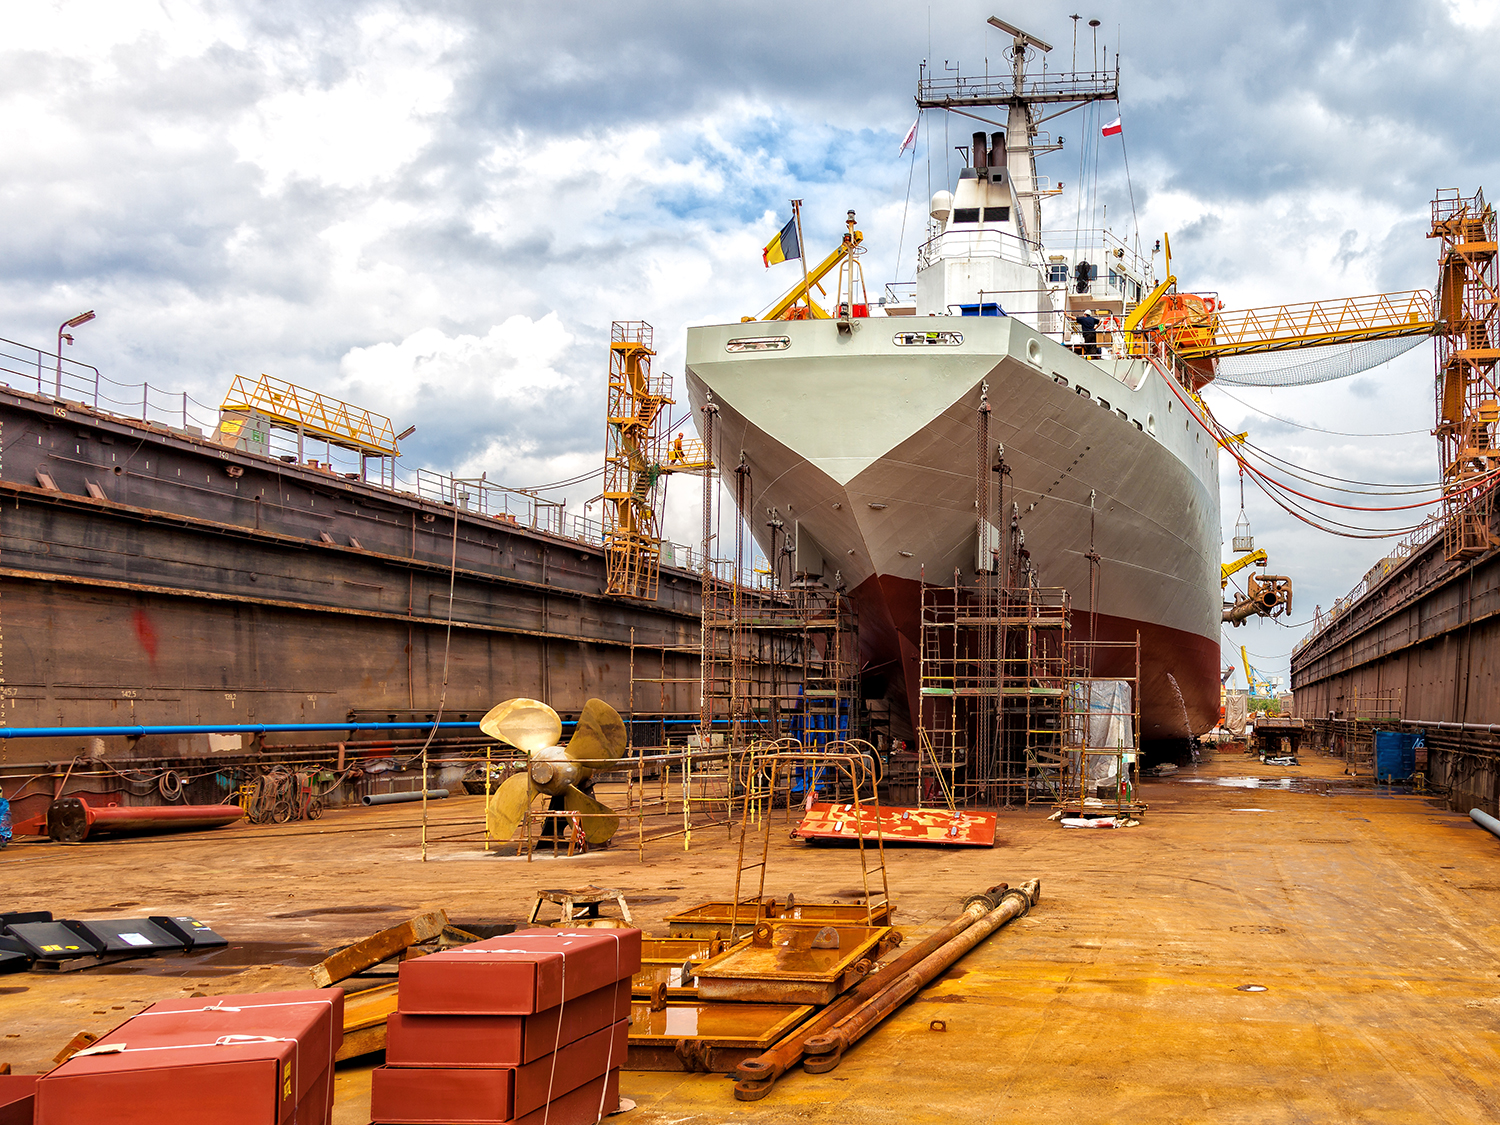 Marine and shipbuilding operation requiring reliable PVF and parts distribution.